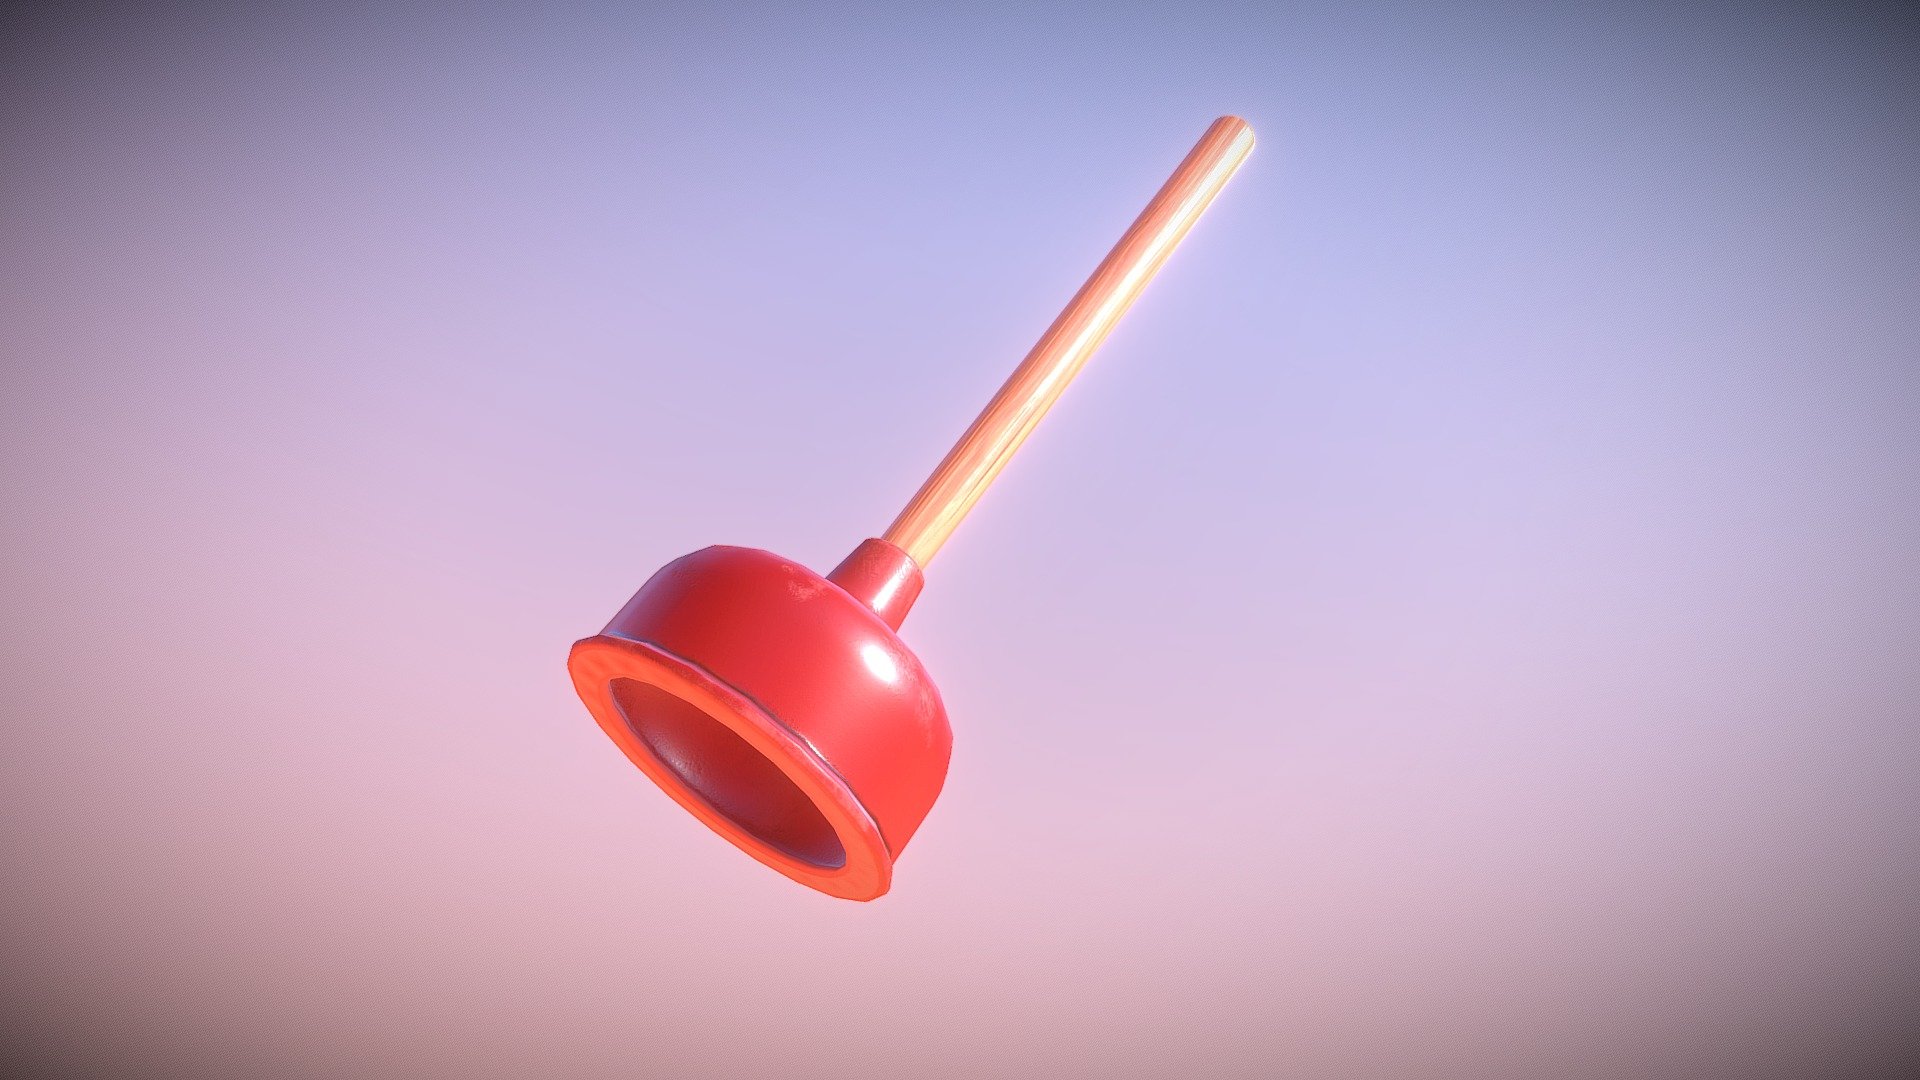 A quick game ready prop created in Blender and Substance painter. 1 hour 3d model